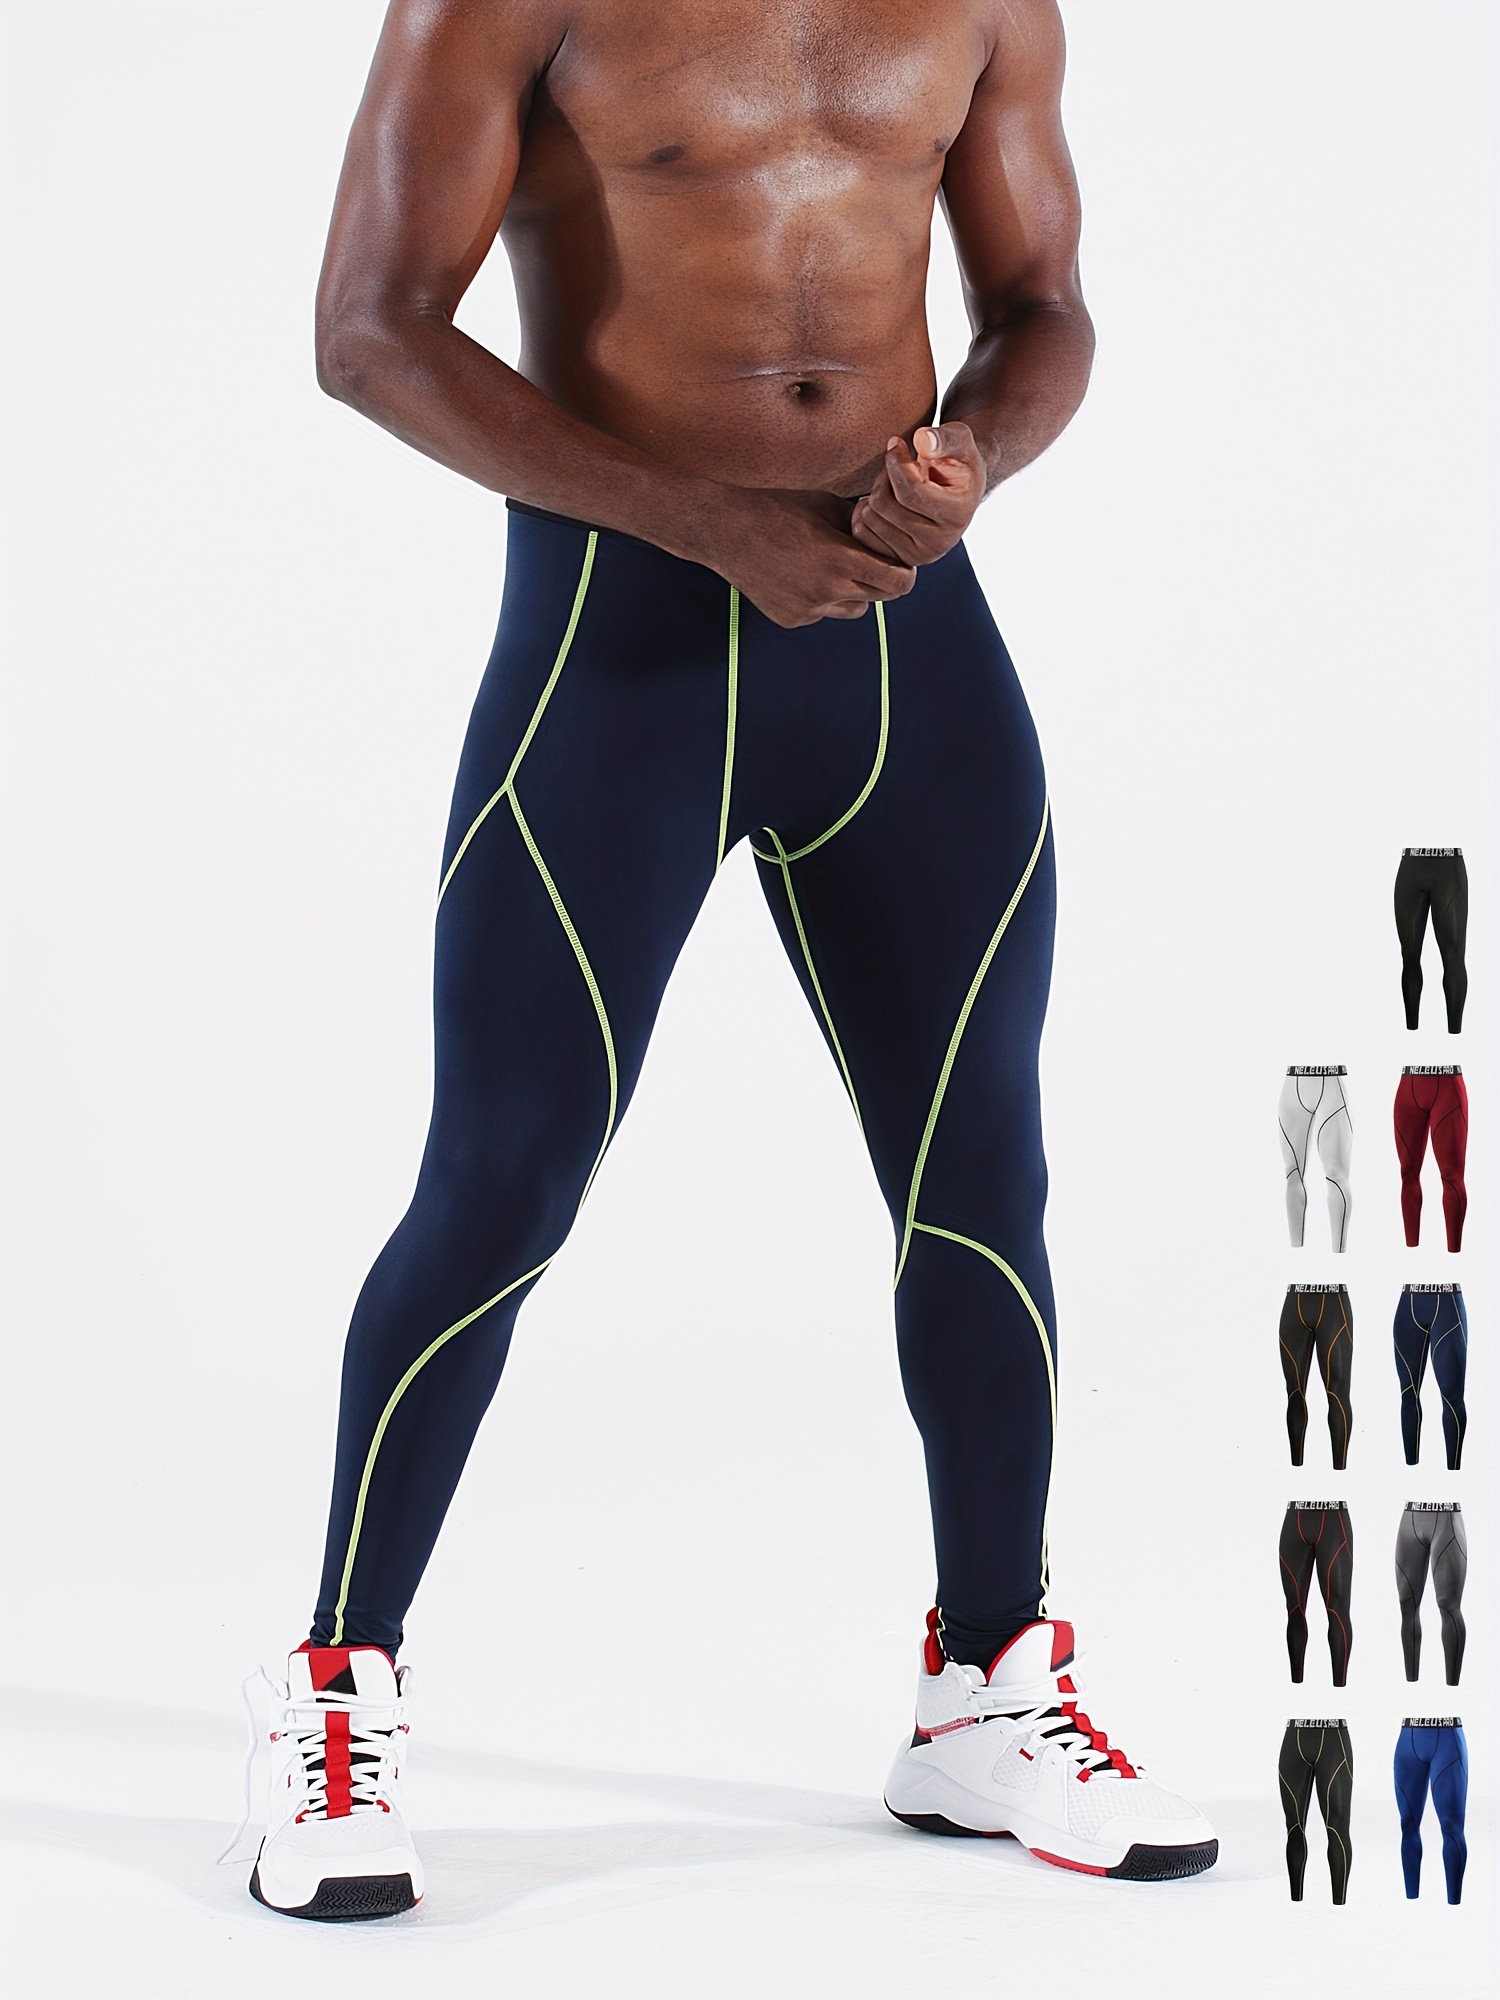 Sport Joggers Compression Track Pants Fitness Men Running Tights GYM  Clothing Football Basketball Training Leggings S XXL Y1890402 From  Shenping03, $8.61